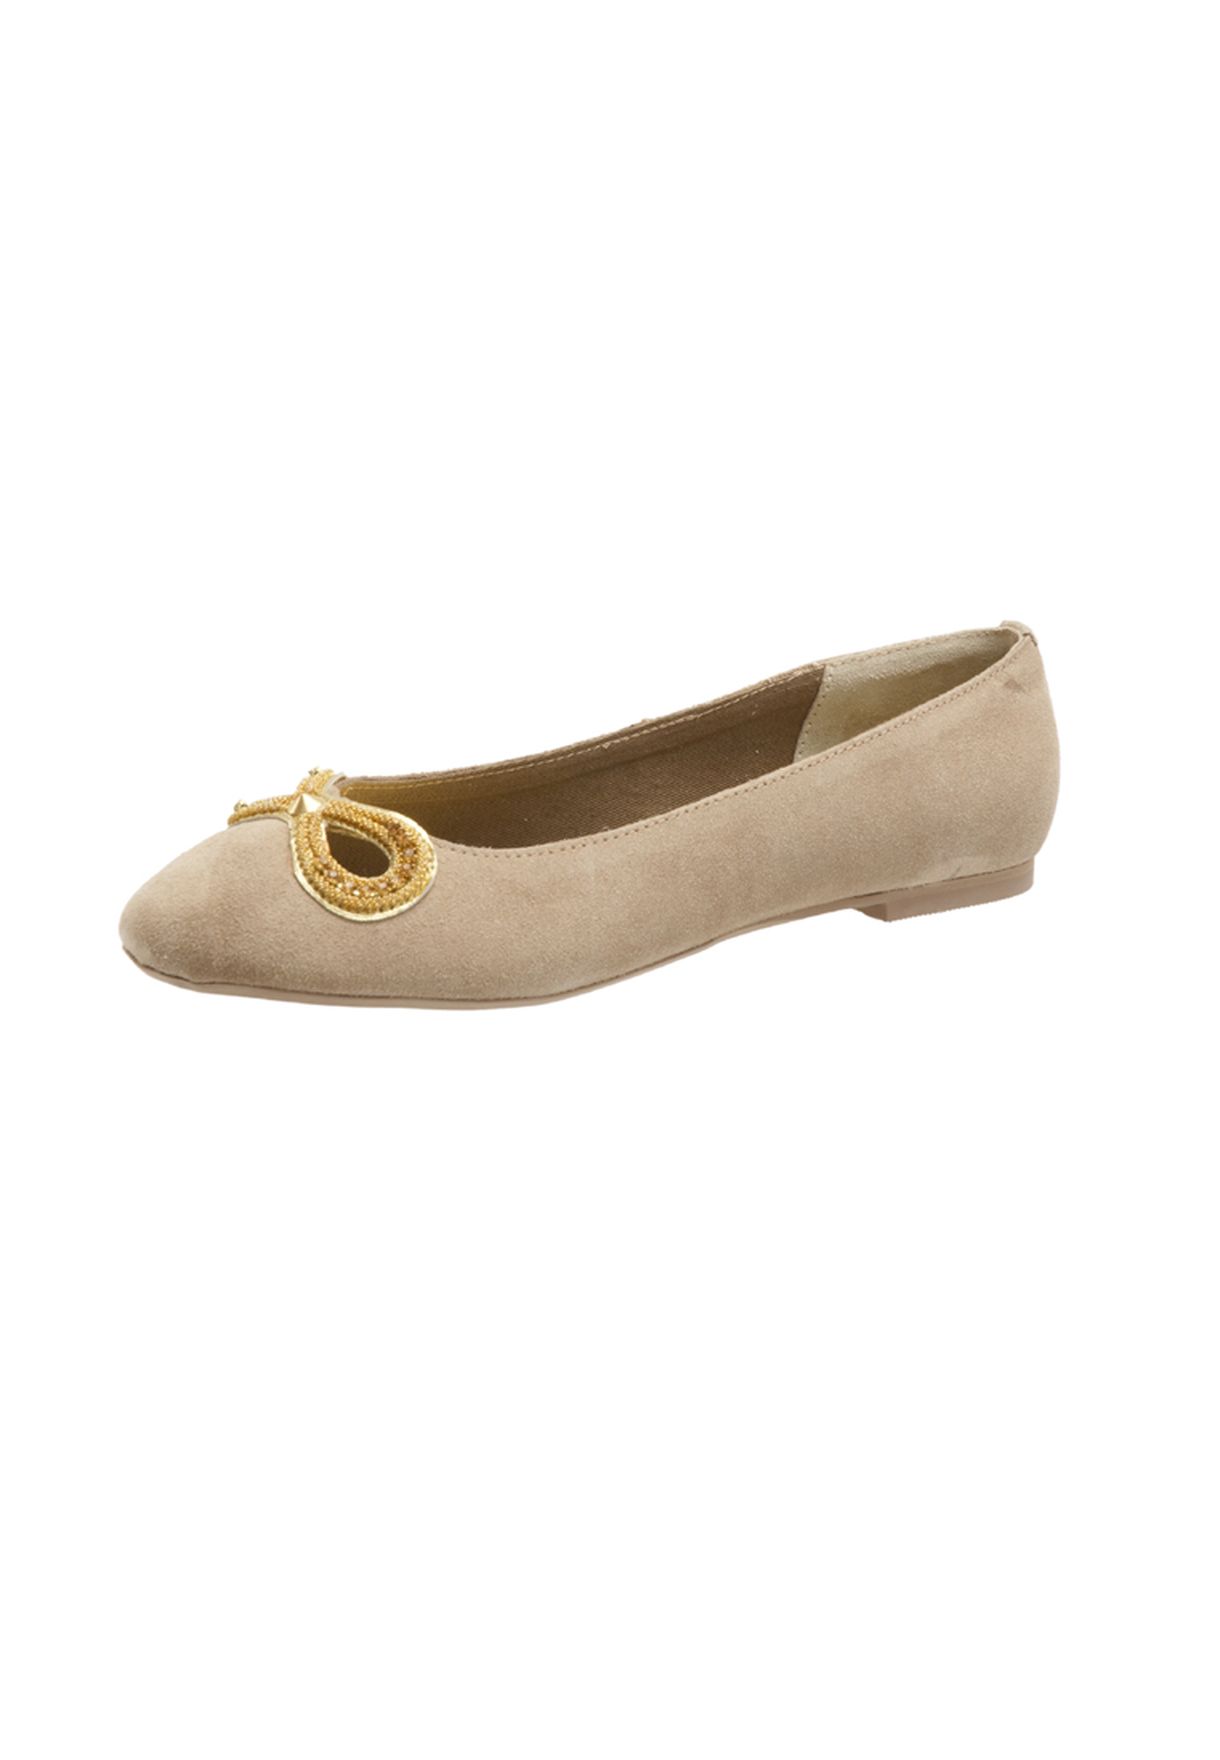 cut out ballerina shoes